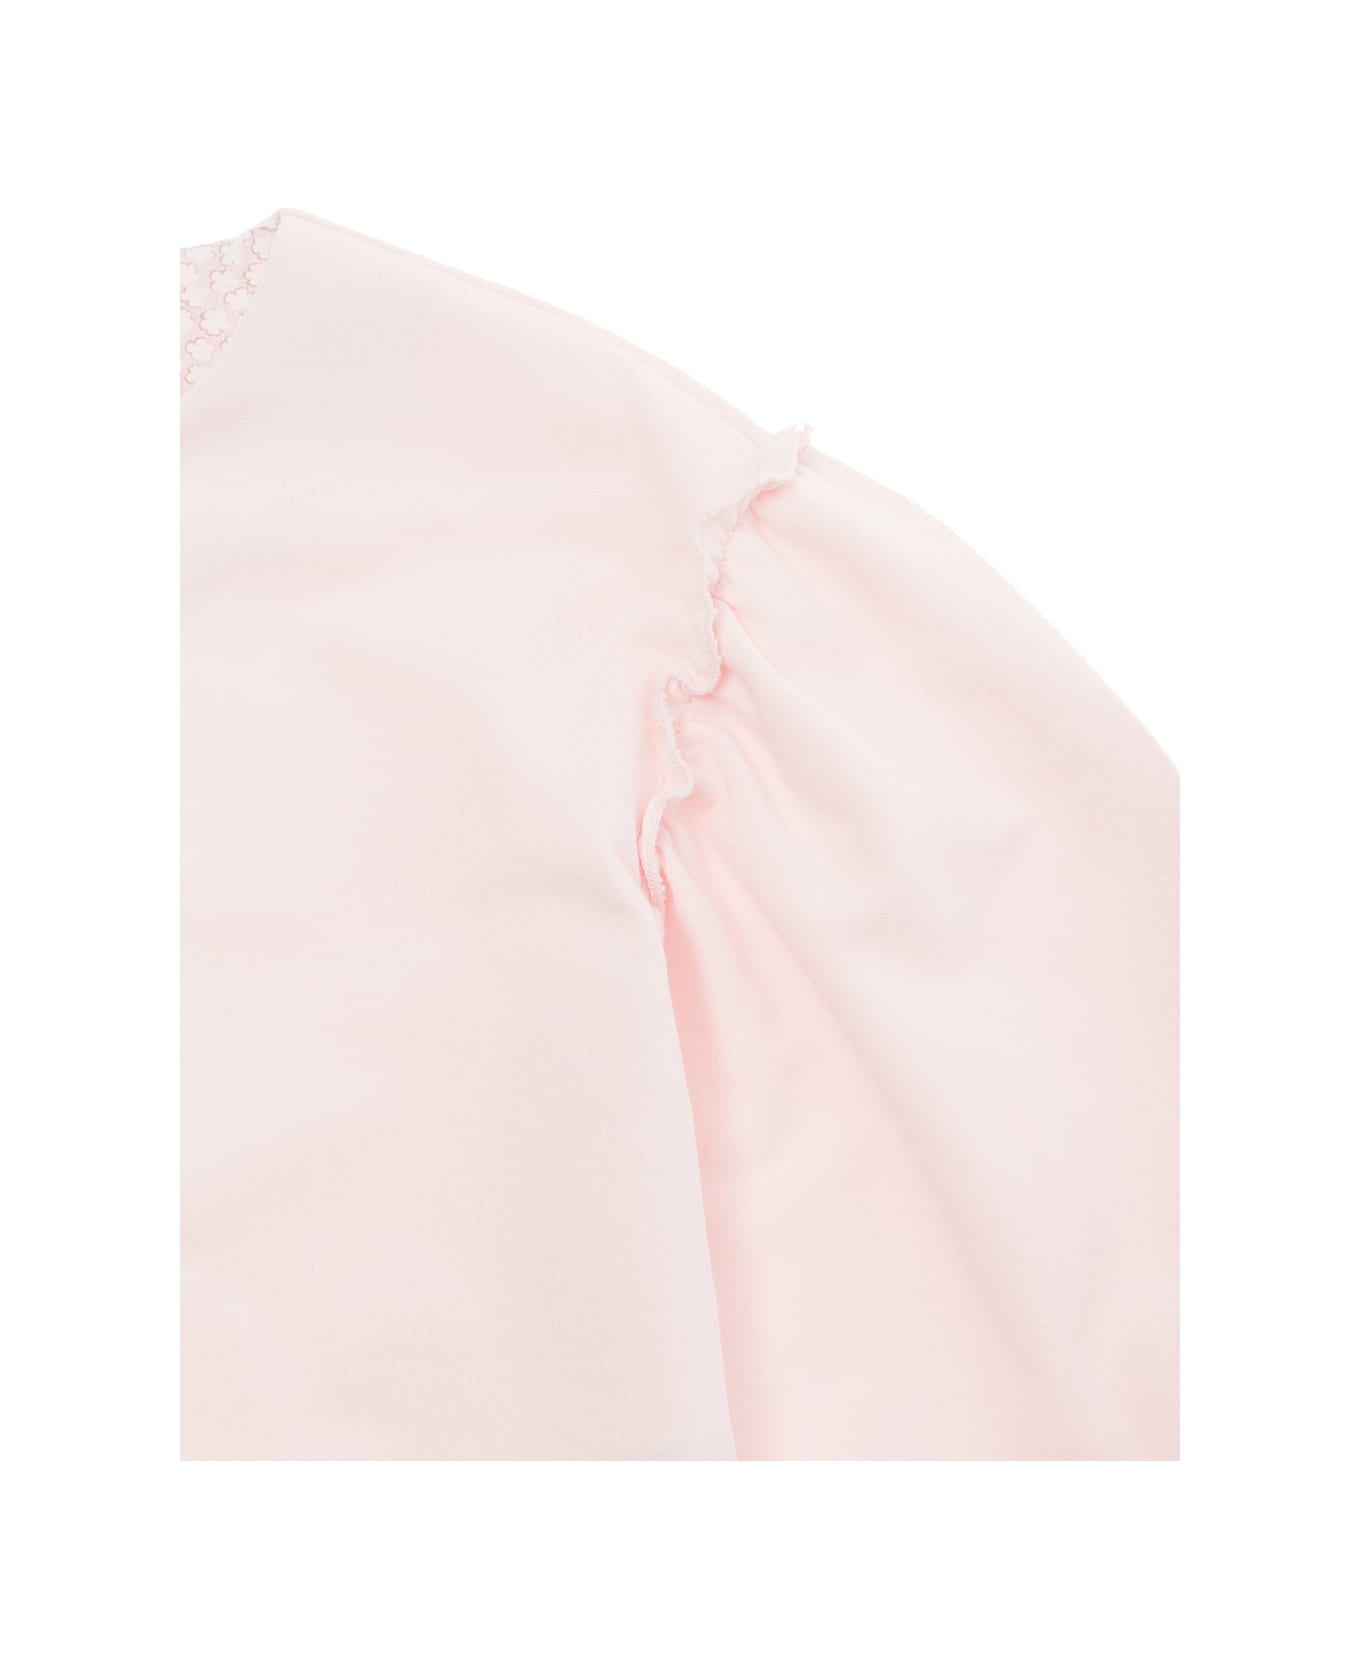 Il Gufo Pink Sweatshirt With Balloon Sleeves In Jersey Baby - Pink